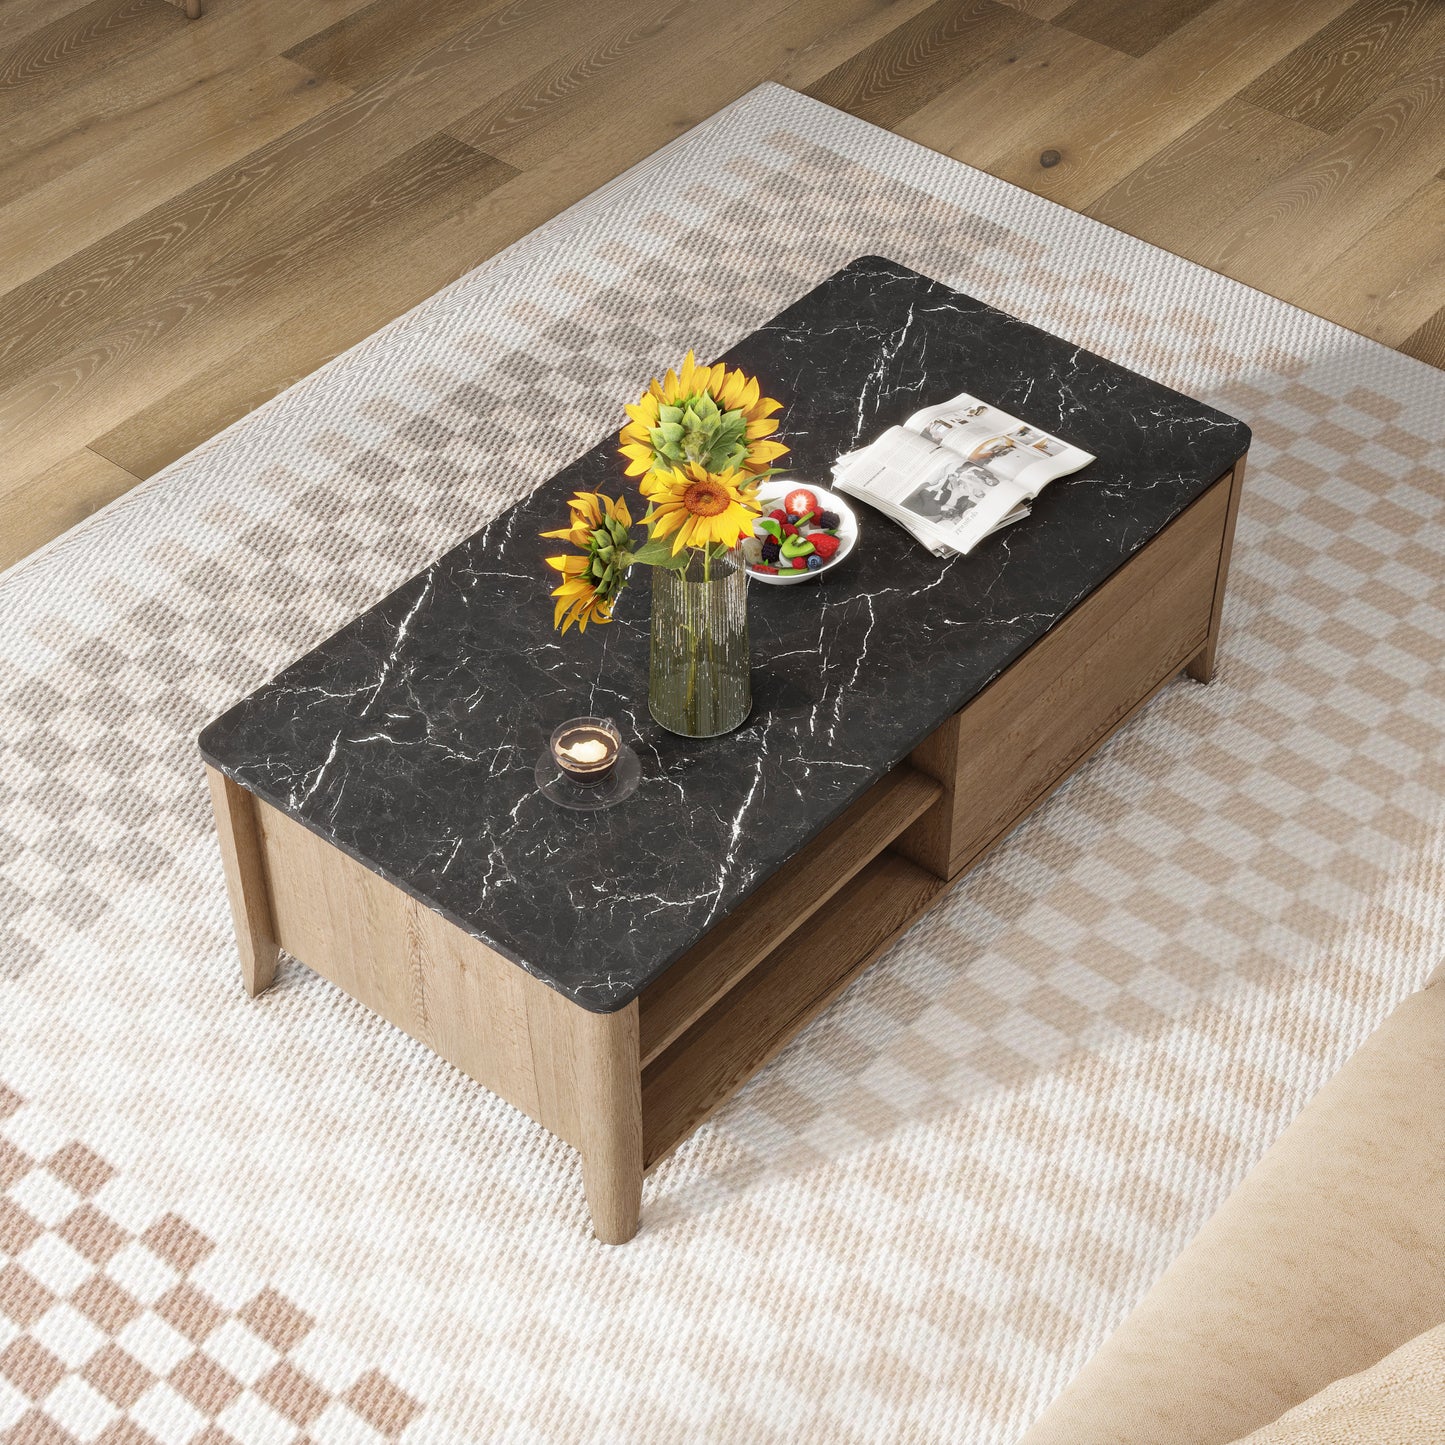 Modern Retro Coffee Table with Storage Drawers in Tobacco Wood and Marble Texture